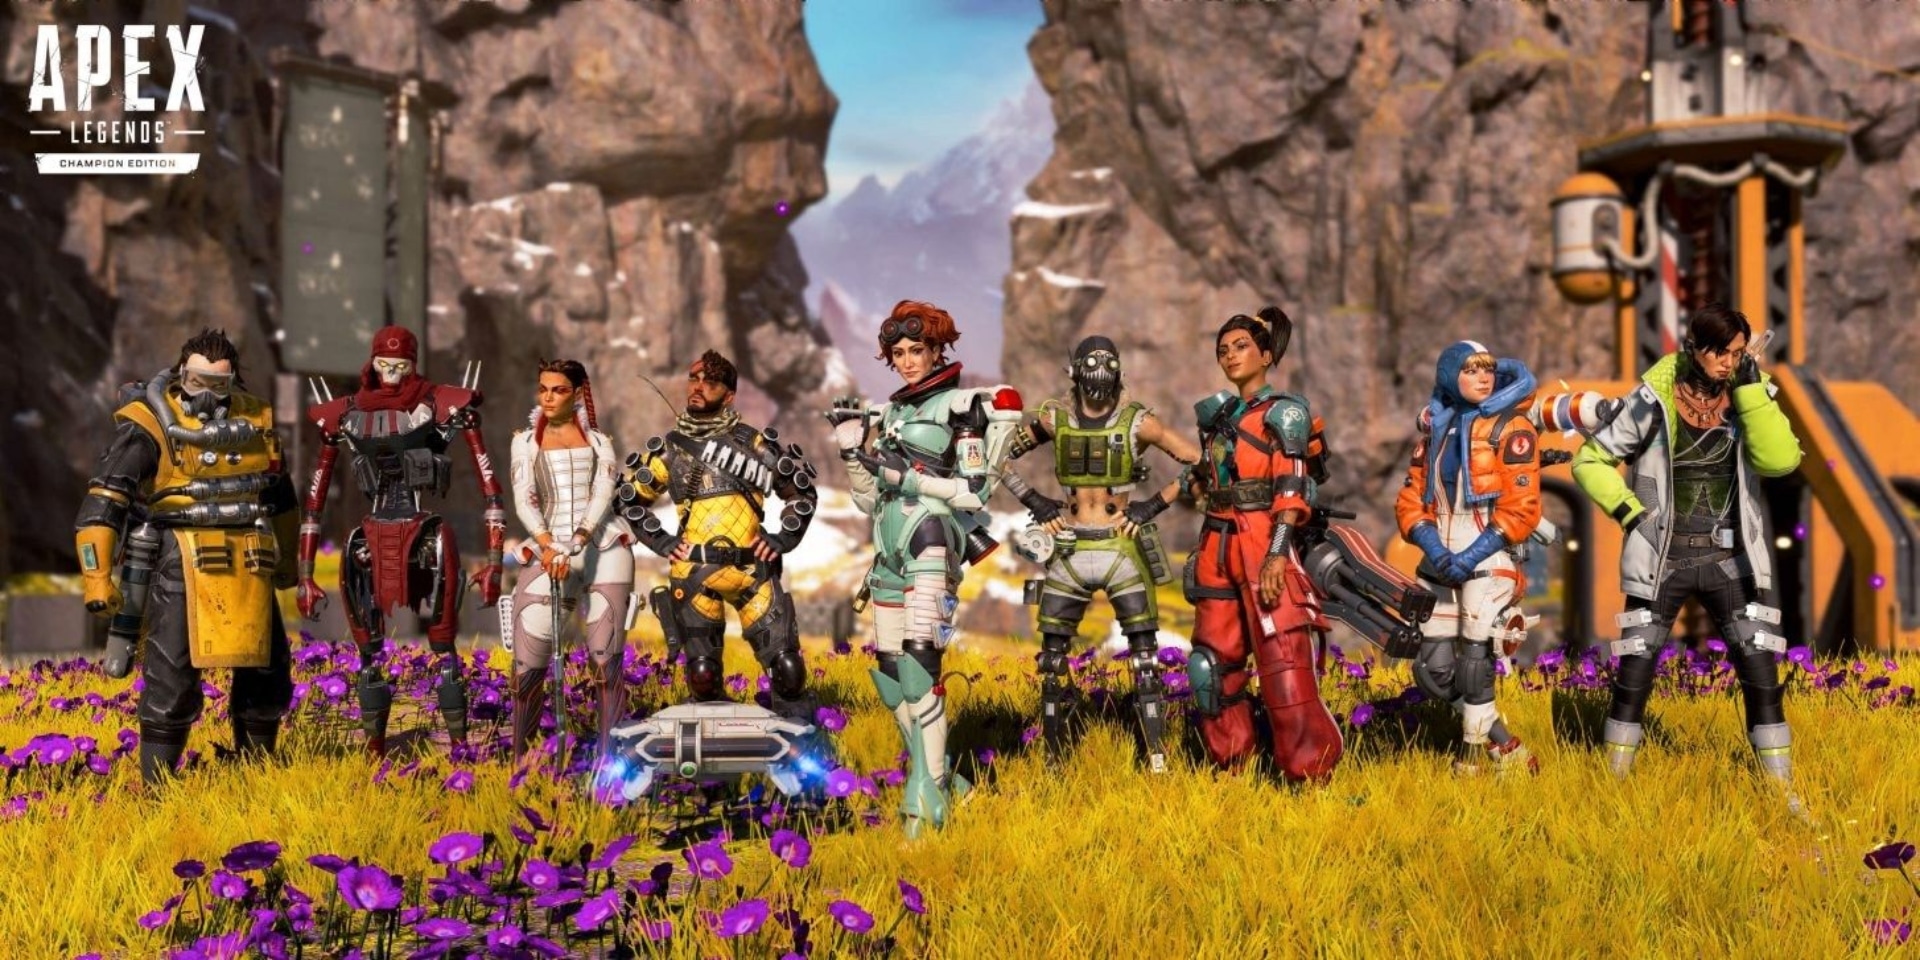 Apex-Legends-a-bunch-of-characters-standing-together-GamersRD (1)